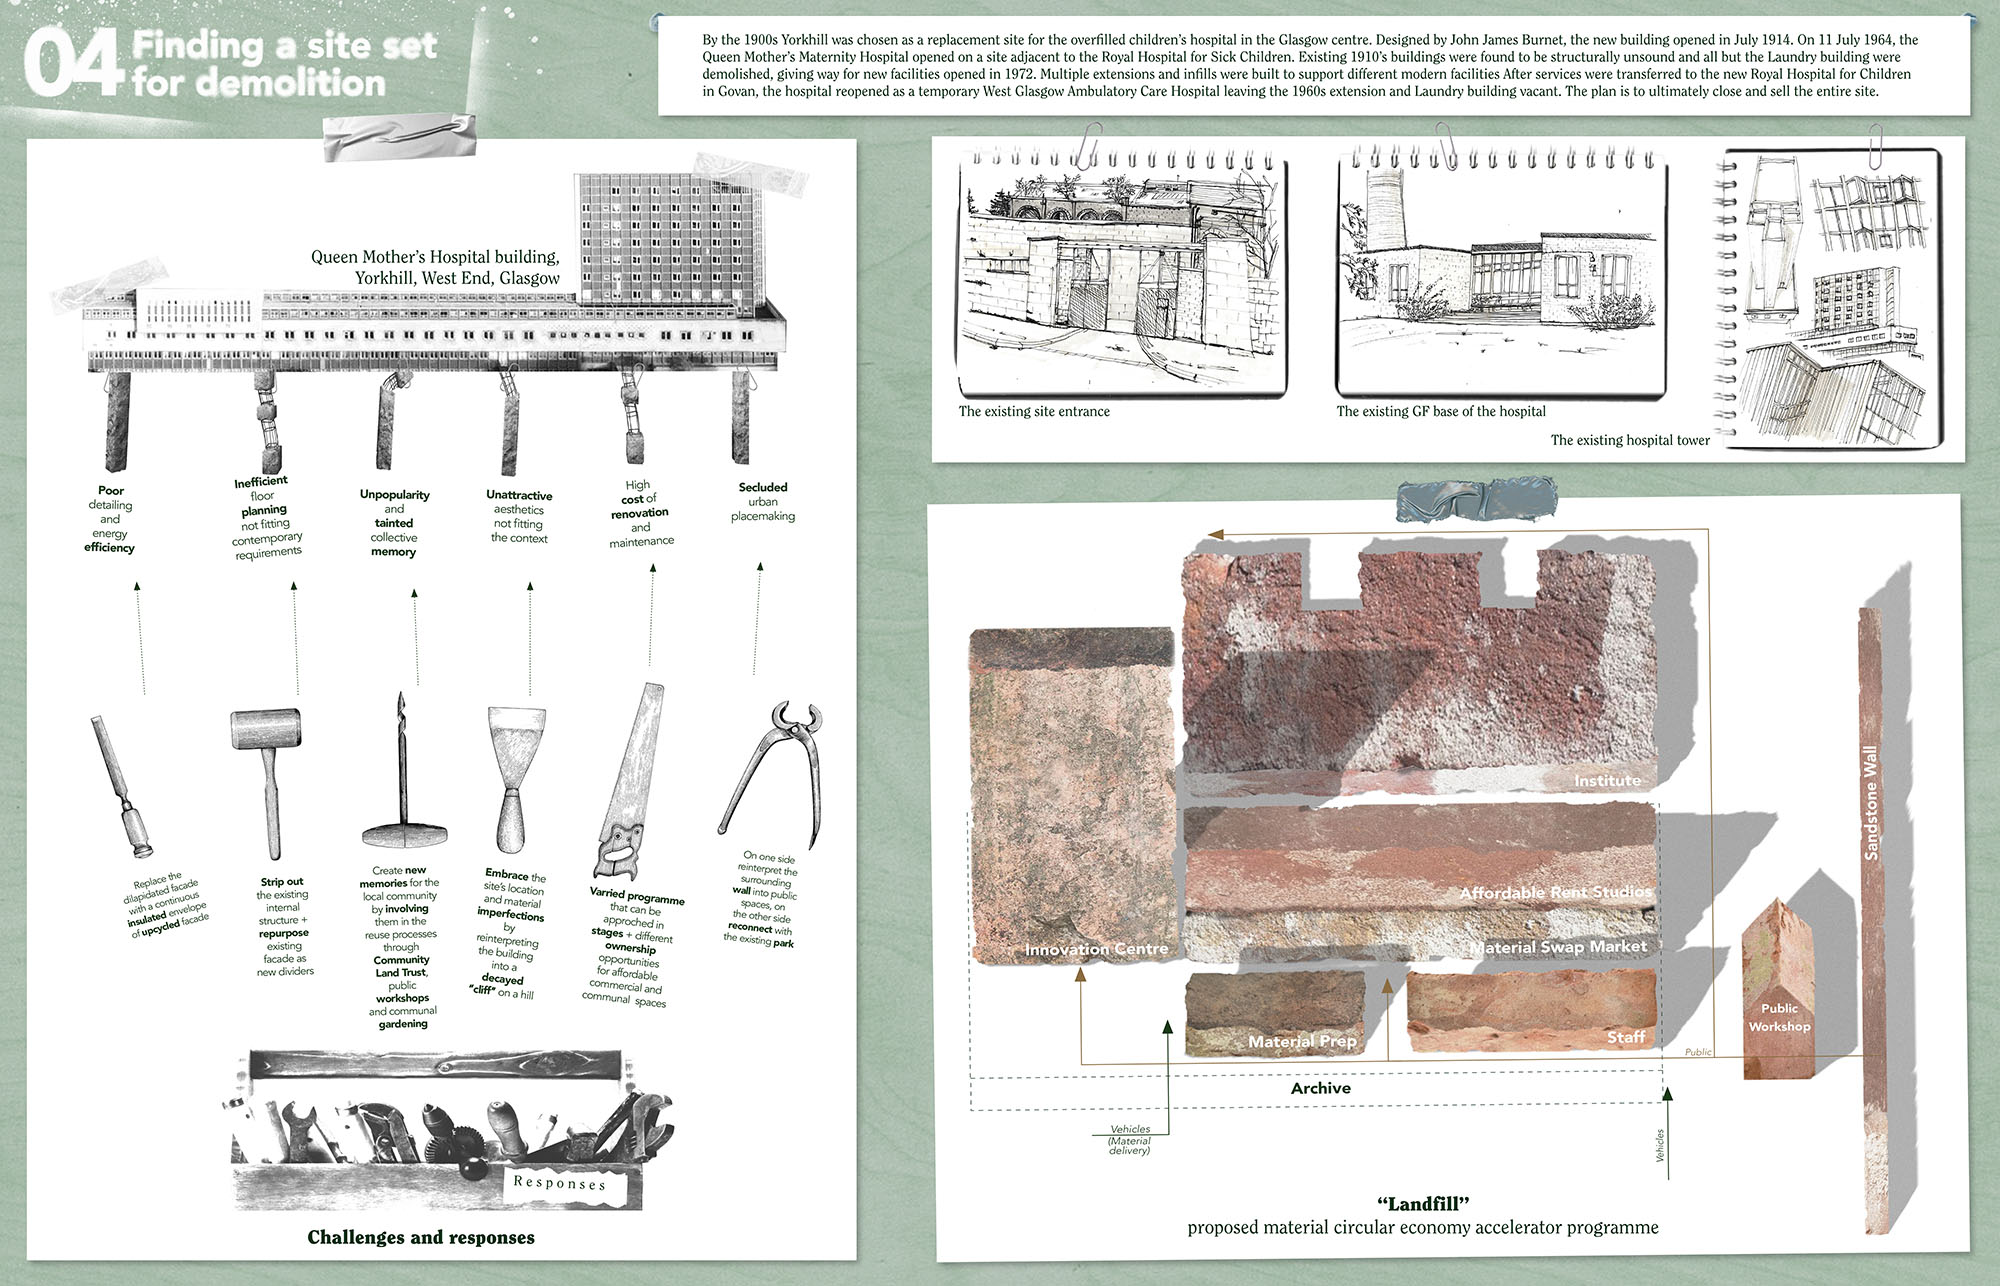 Page 4 of Karlis Kukainis winning entry to the A&DS and RIAS Scottish Student Award. The board includes sample materials for the landfill sites alongside architectural drawings for the Queen Mother Hospital building in Glasgow.